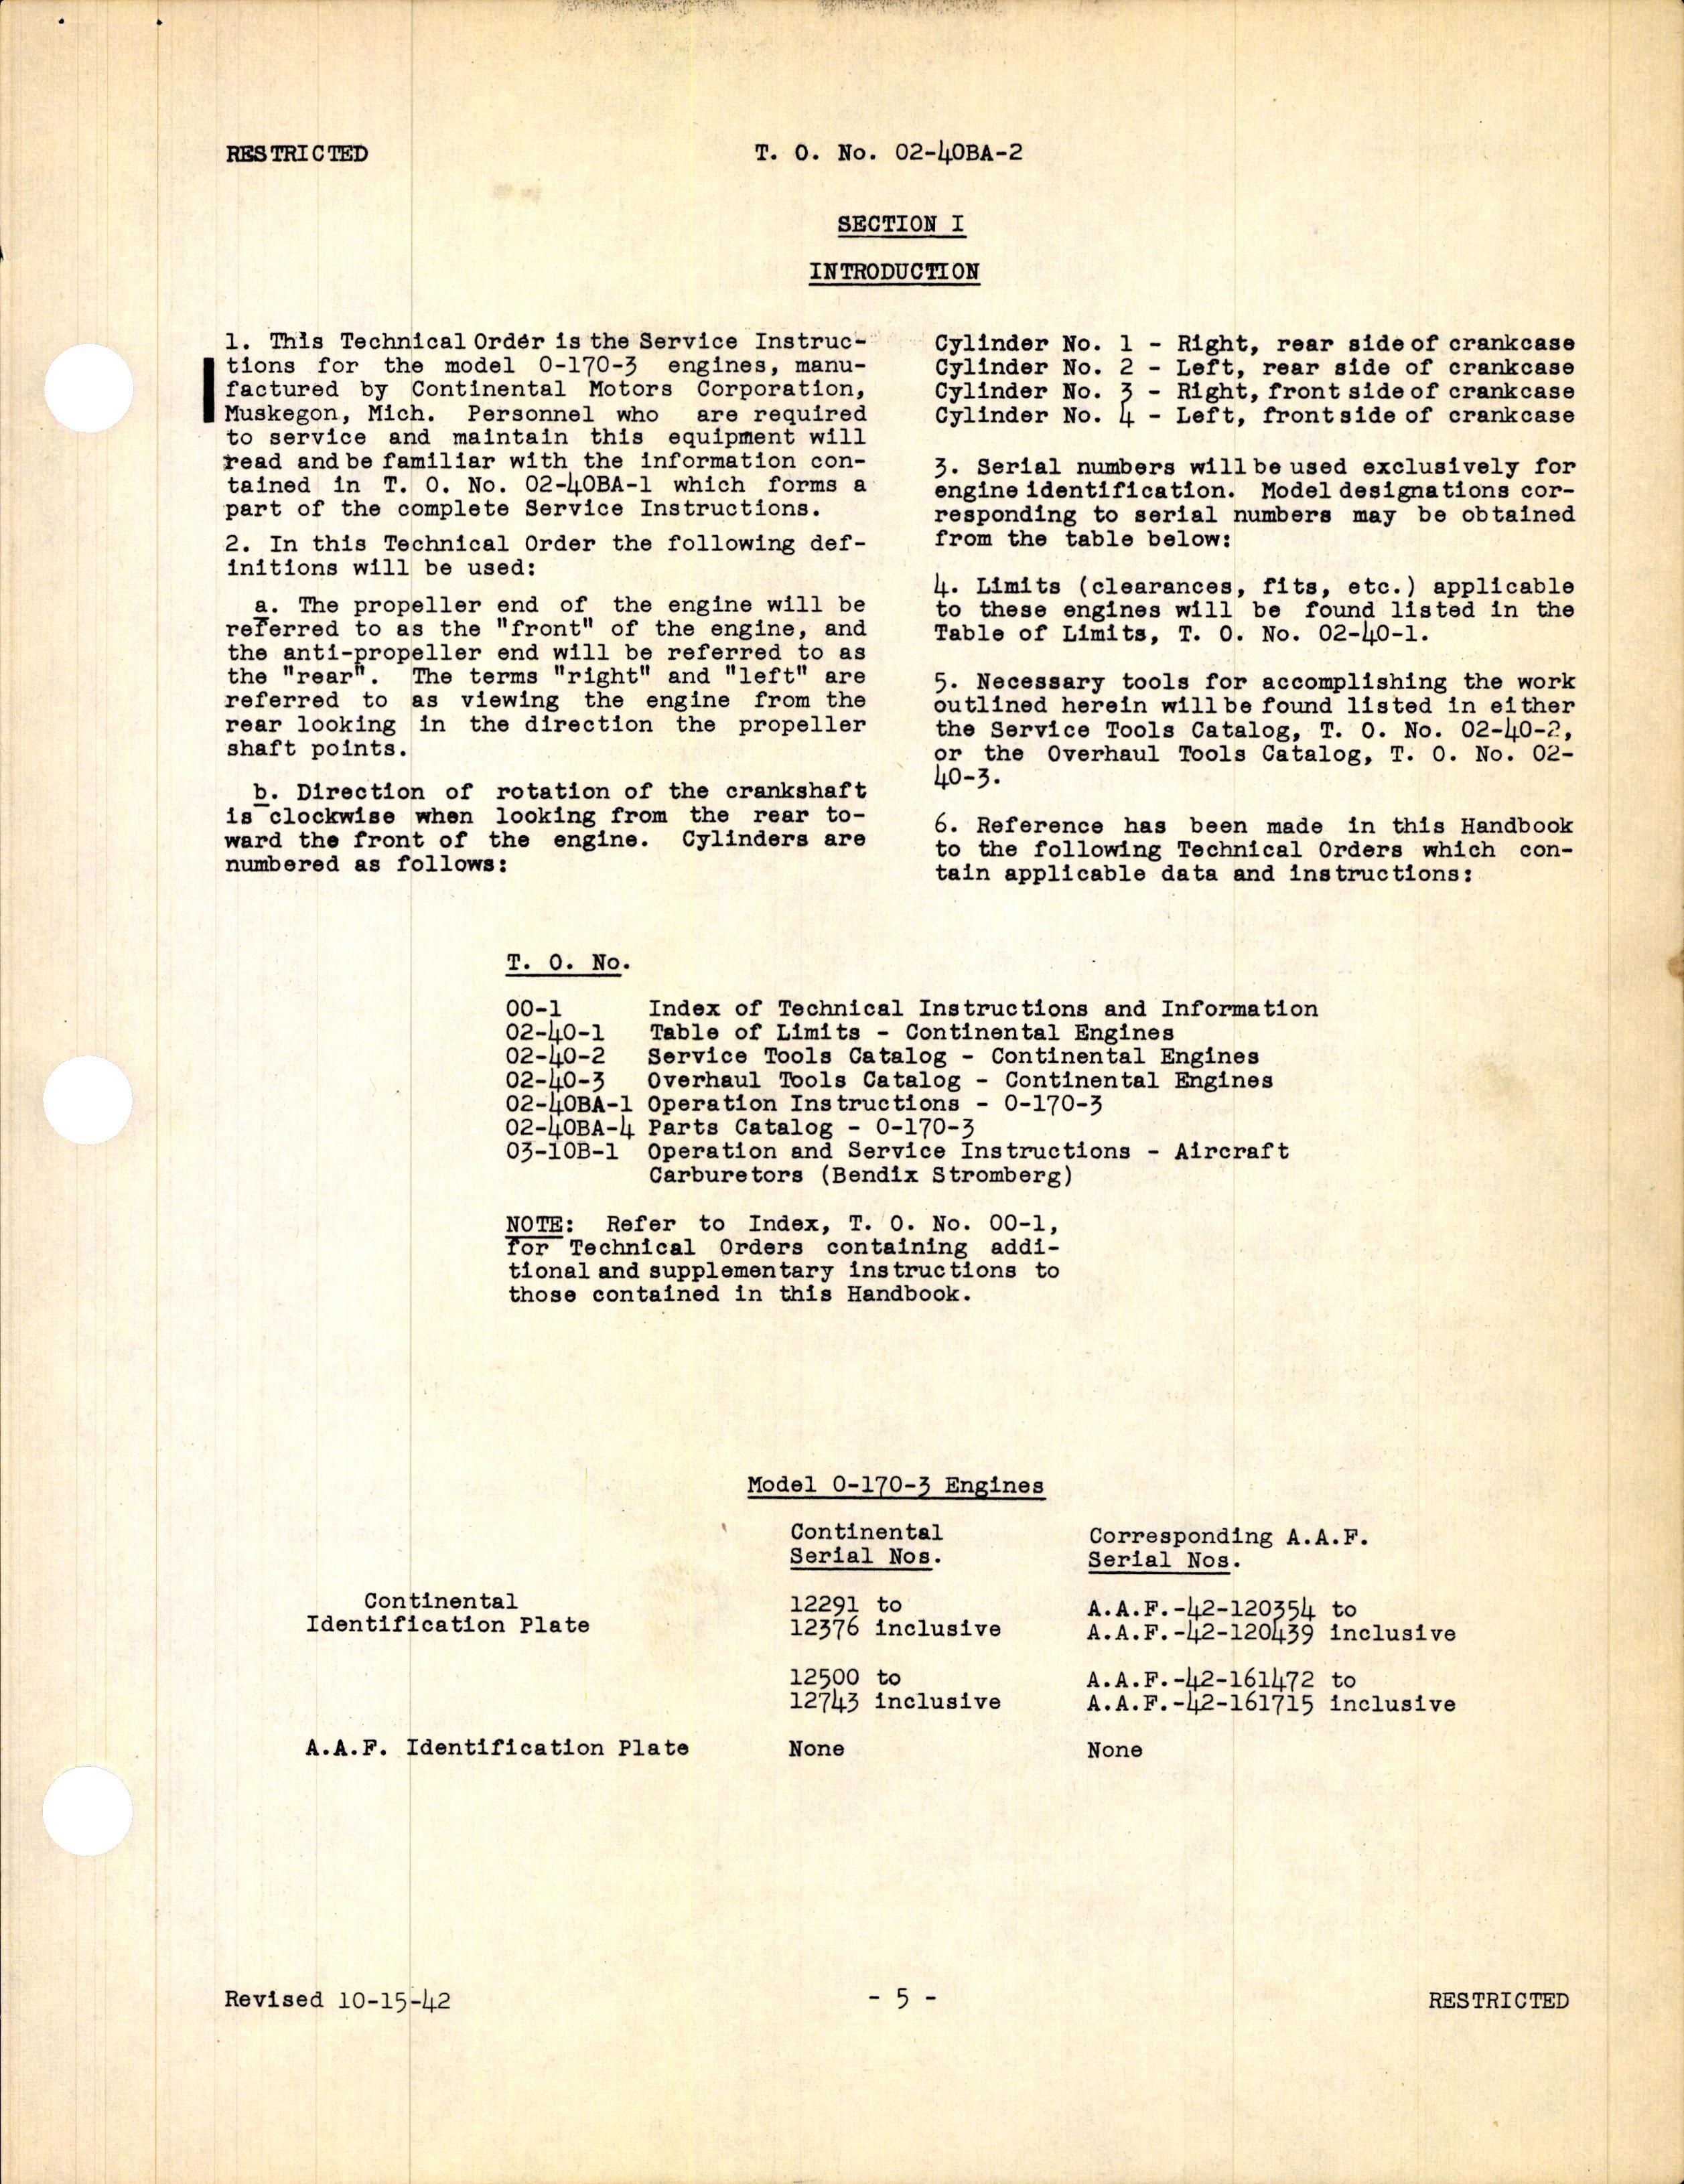 Sample page 7 from AirCorps Library document: Service Instructions for the Model 0-170-3 Engine & Associated Models